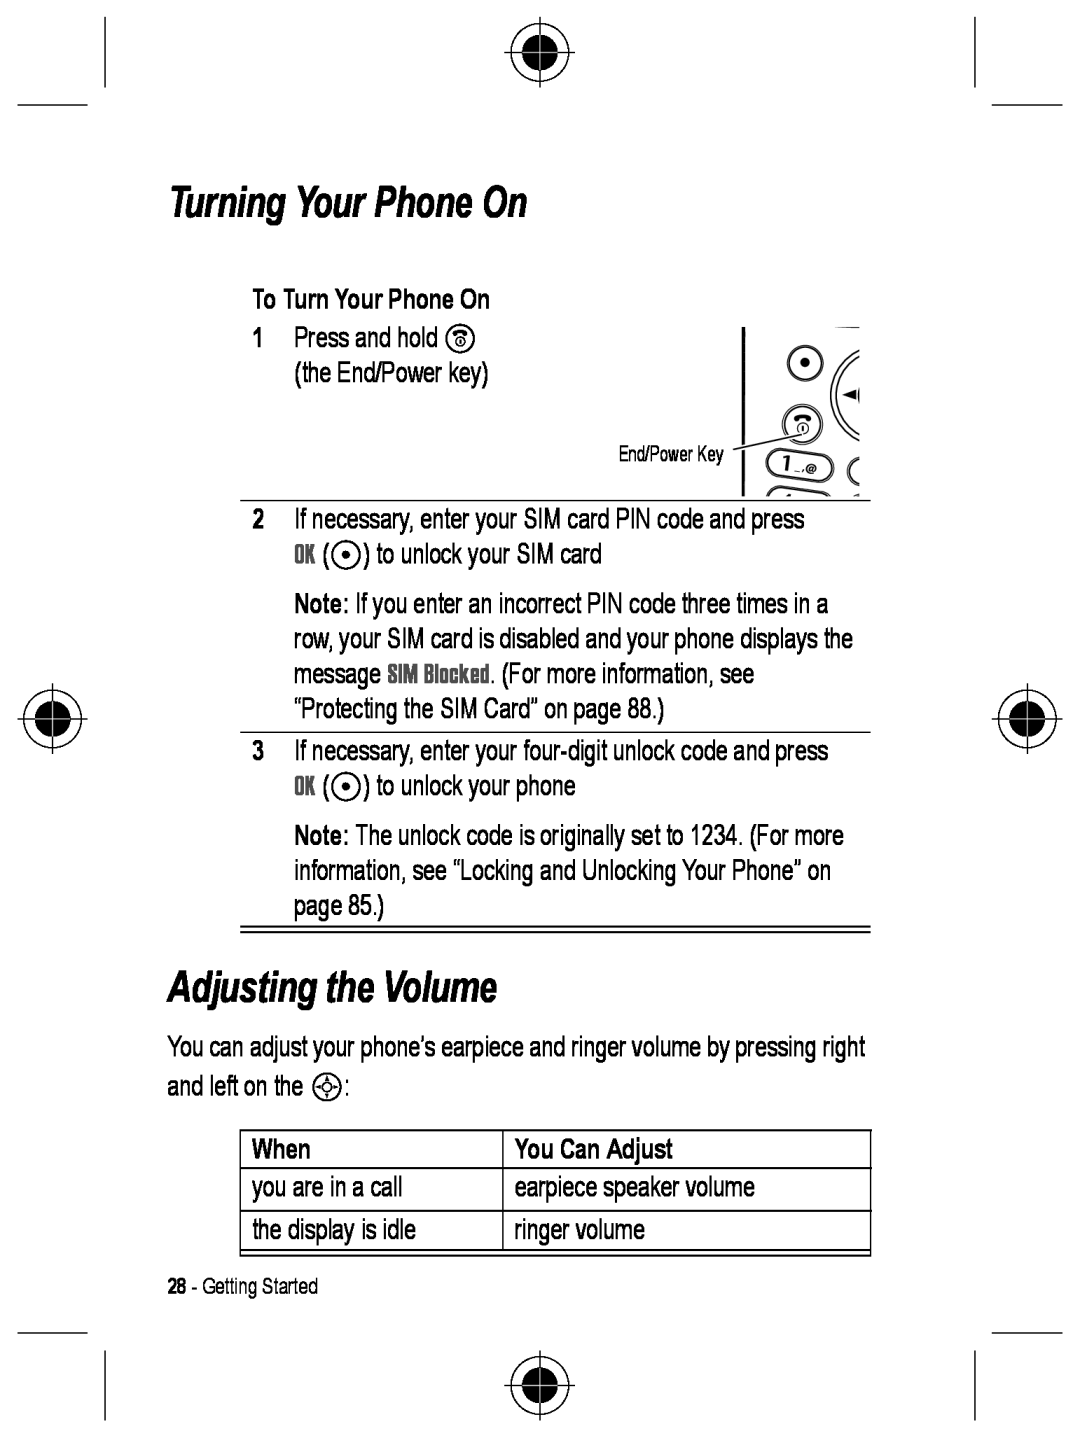 Motorola C330 manual Turning Your Phone On, Adjusting the Volume, To Turn Your Phone On, When, You Can Adjust 